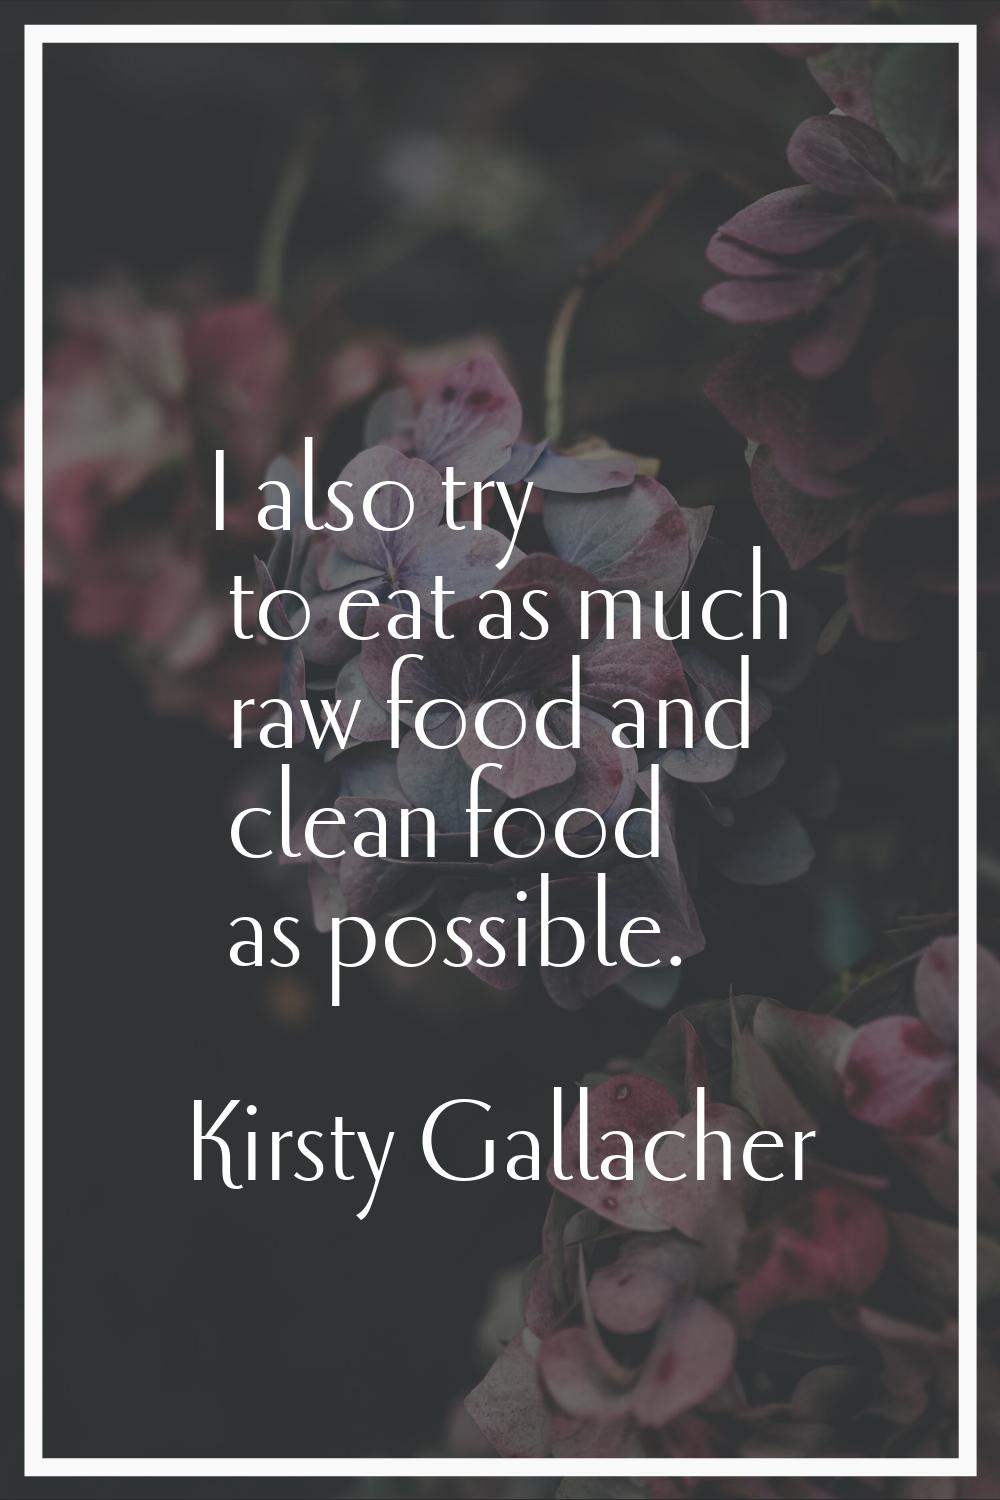 I also try to eat as much raw food and clean food as possible.